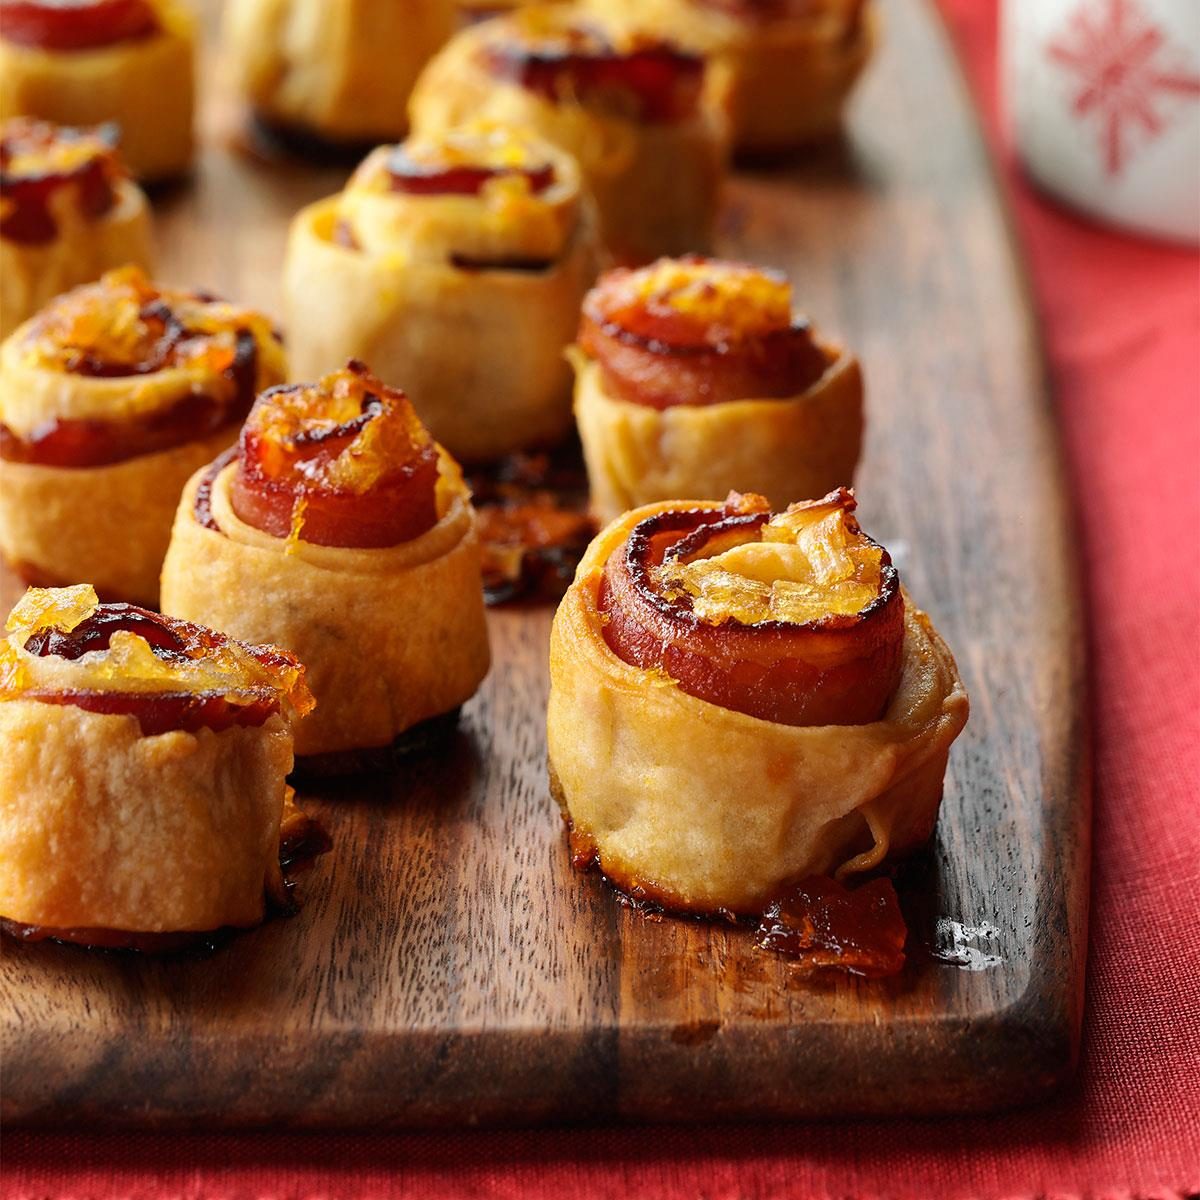 <p>Here’s a real crowd-pleaser for an appetizer table or brunch buffet. A whole piece of crispy bacon is rolled into each spiral. It's so good with the apricot preserves, which make it a sweet-and-salty treat. —Kellie Mulleavy, Lambertville, Michigan</p> <div class="listicle-page__buttons"> <div class="listicle-page__cta-button"><a href='https://www.tasteofhome.com/recipes/apricot-glazed-bacon-spirals/'>Go to Recipe</a></div> </div>